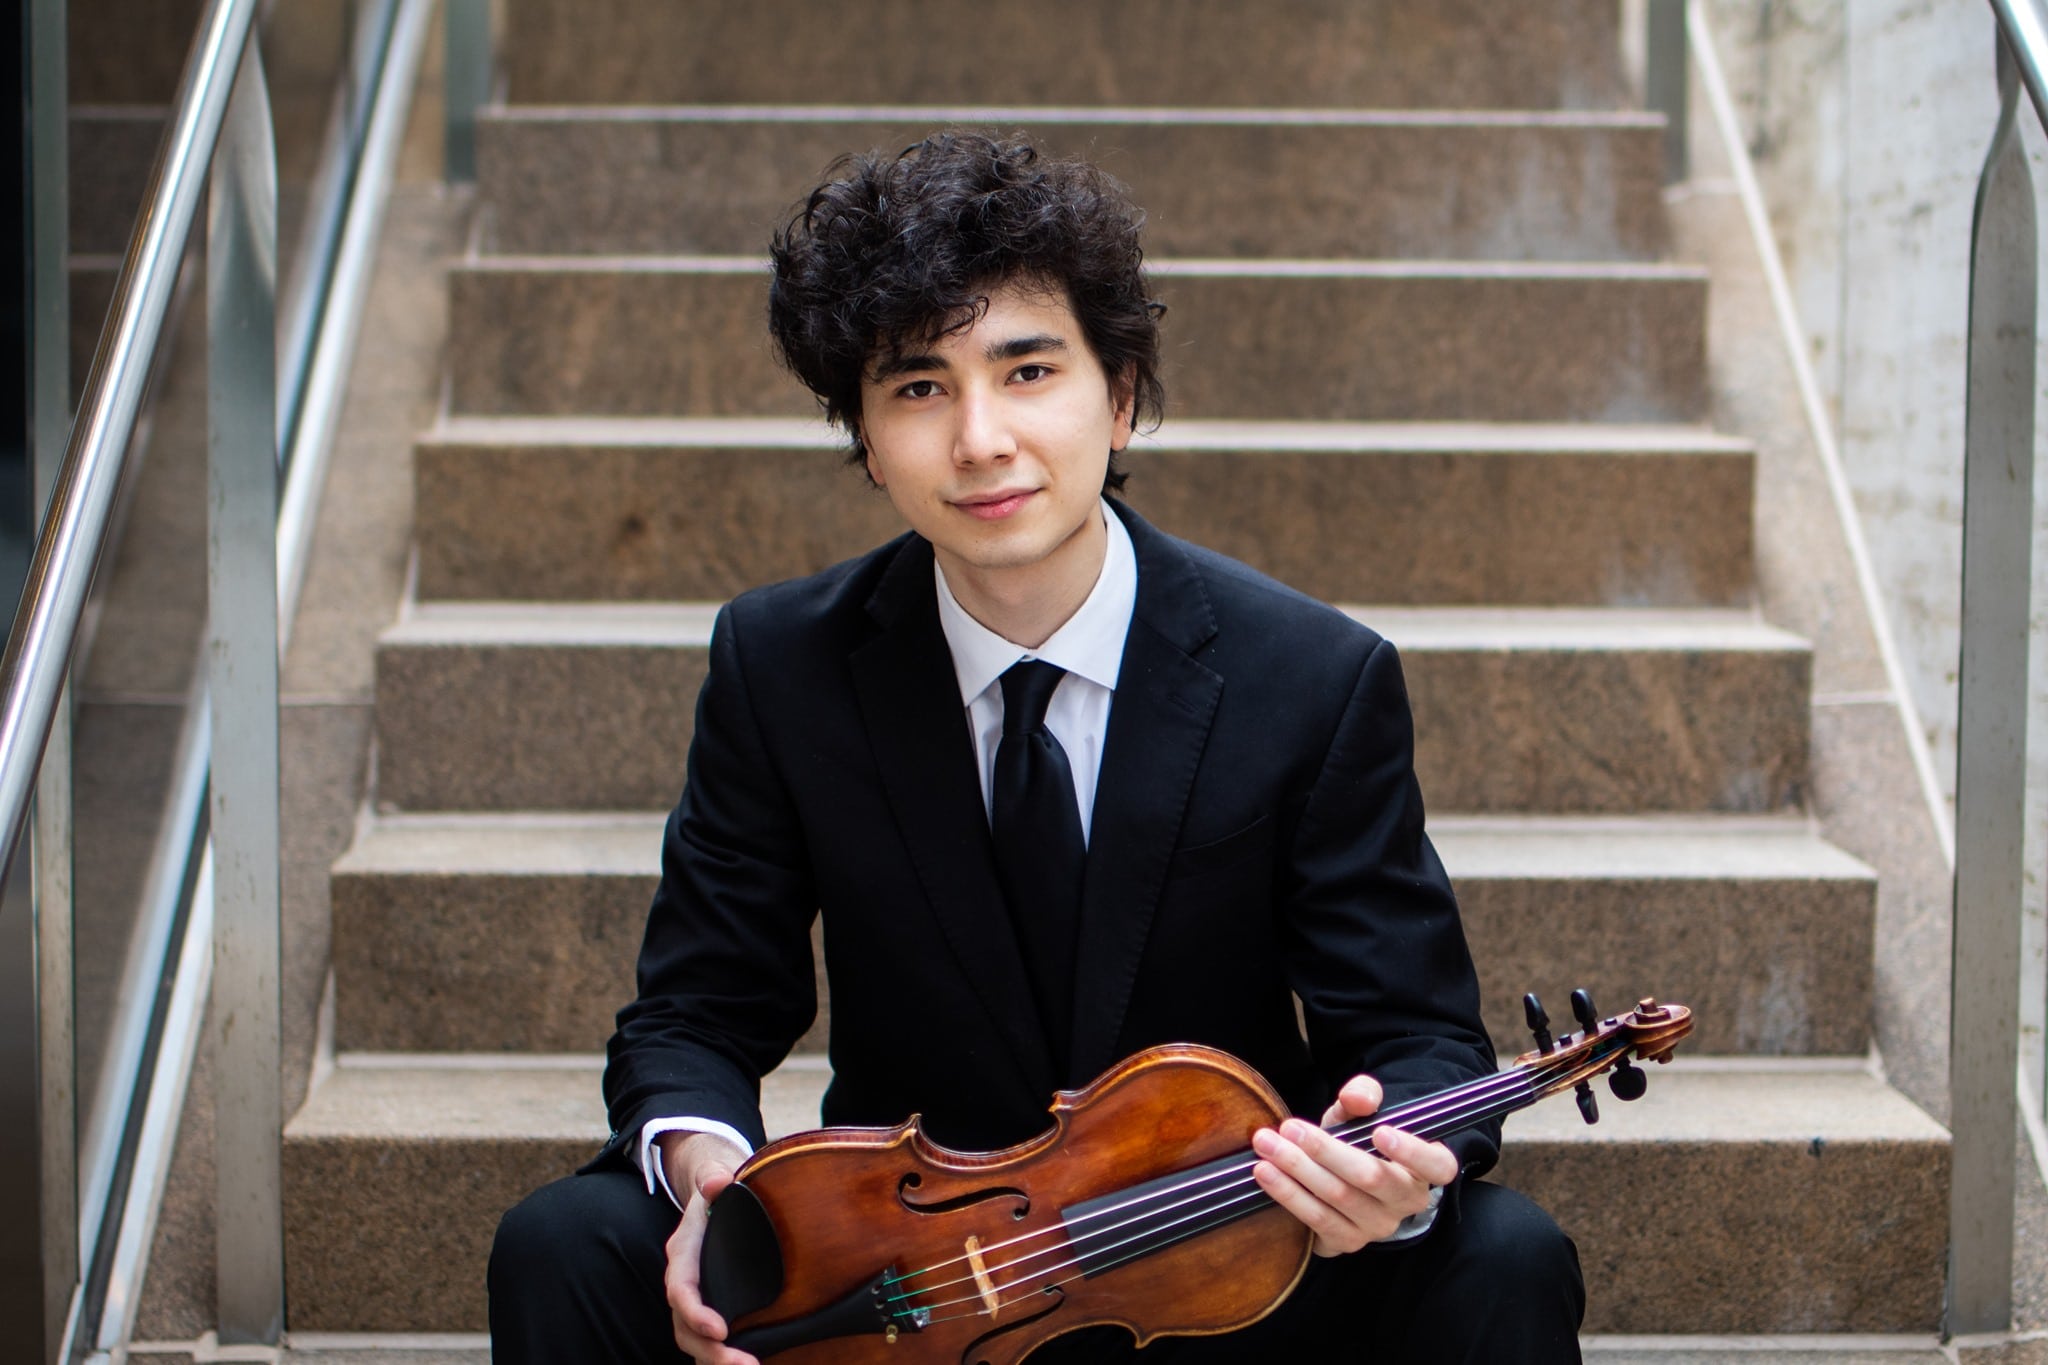 Two Americans make it into the Vienna Philharmonic academy